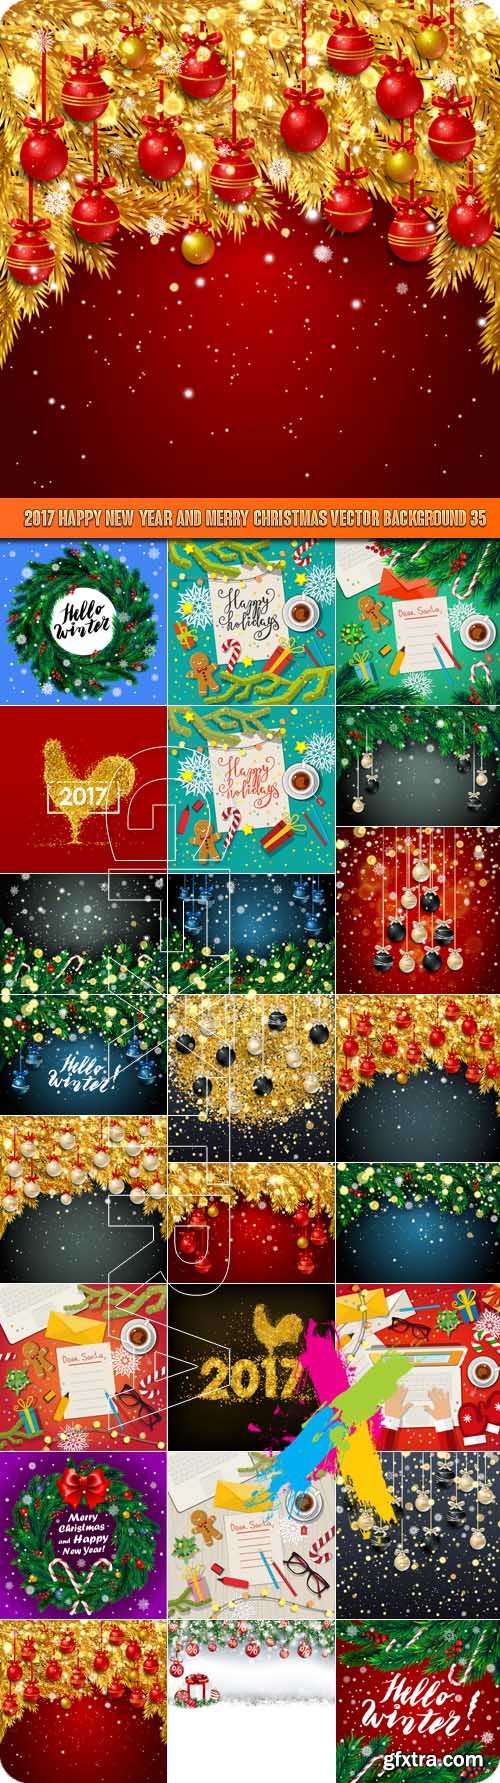 2017 Happy New Year and Merry Christmas vector background 35